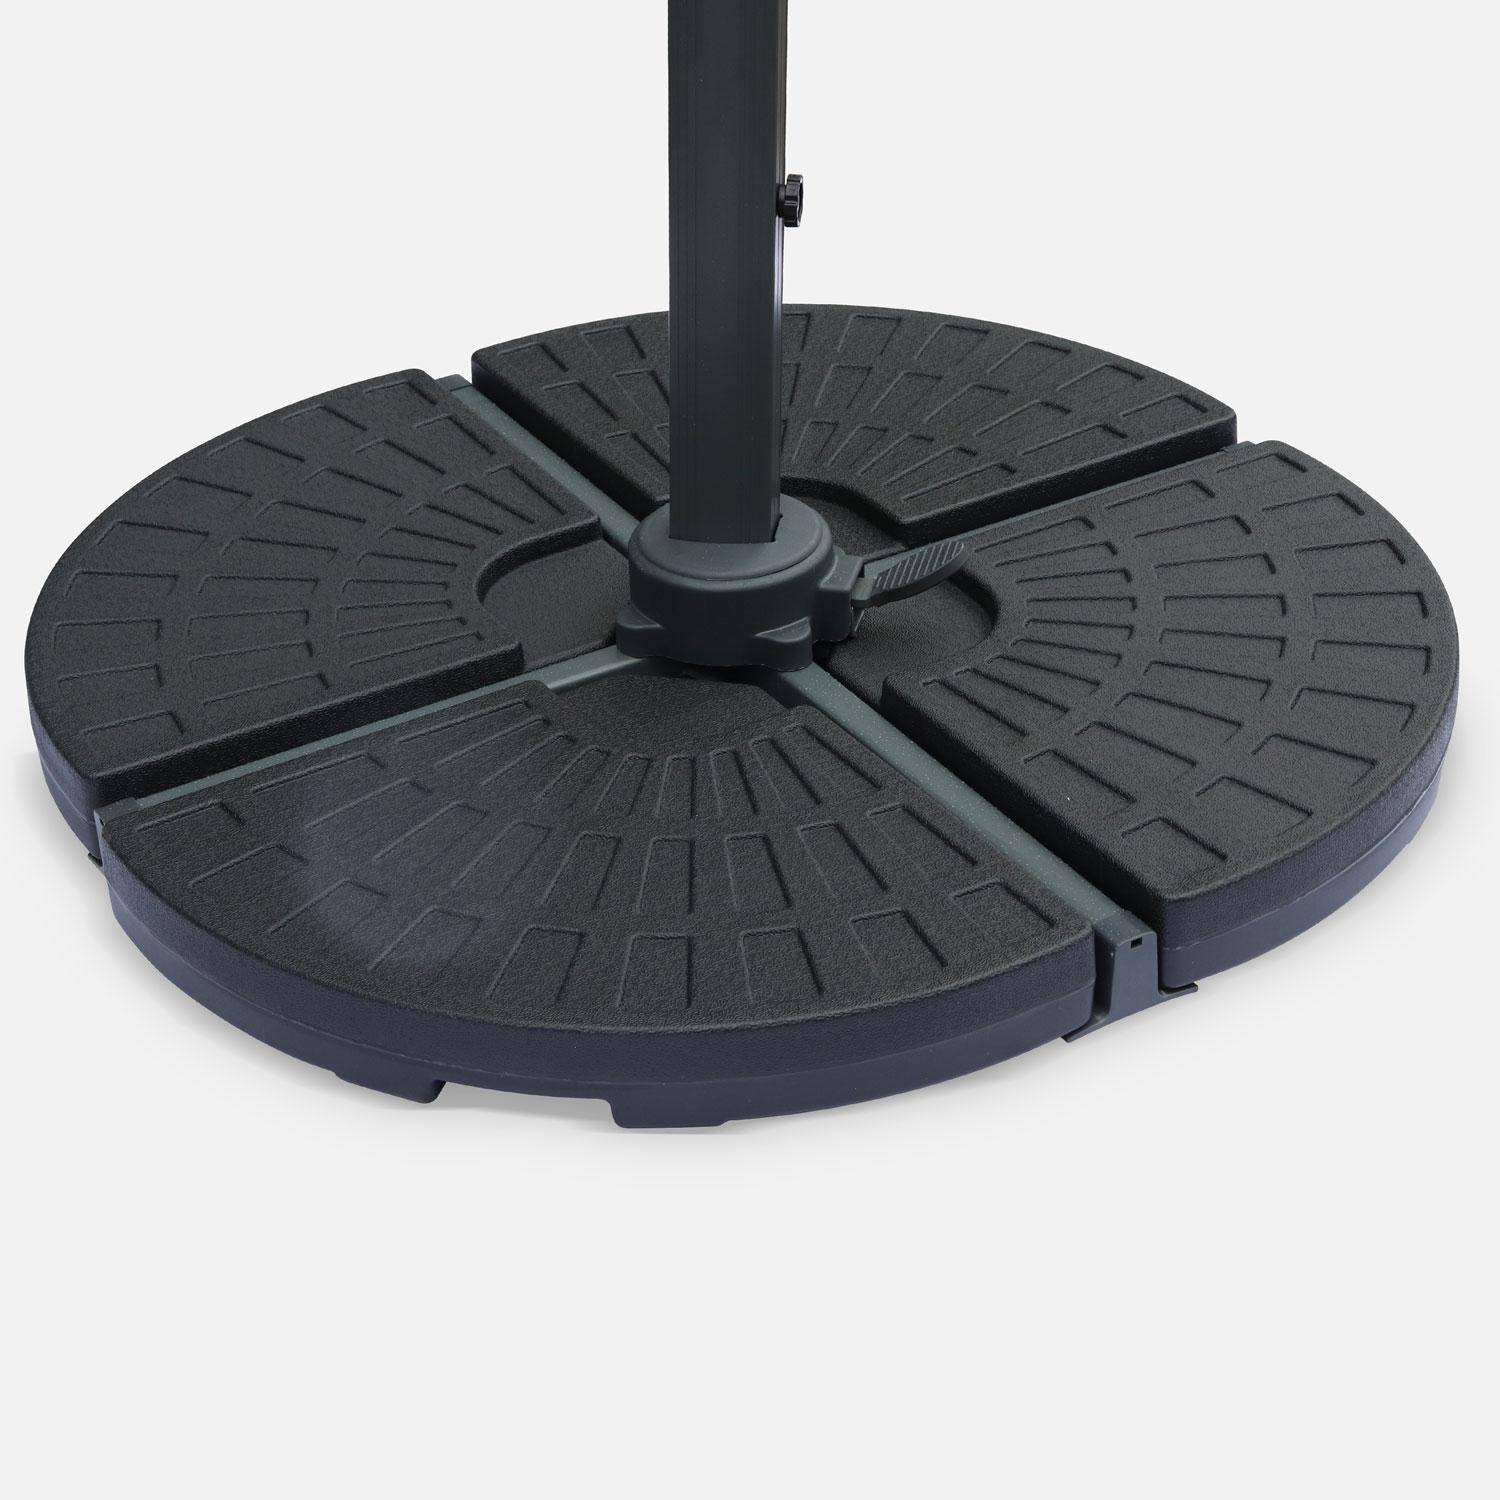 Cantilever parasol base - set of 4 rounded base weights, 48x48cm, fits parasols with cross legged base Photo2